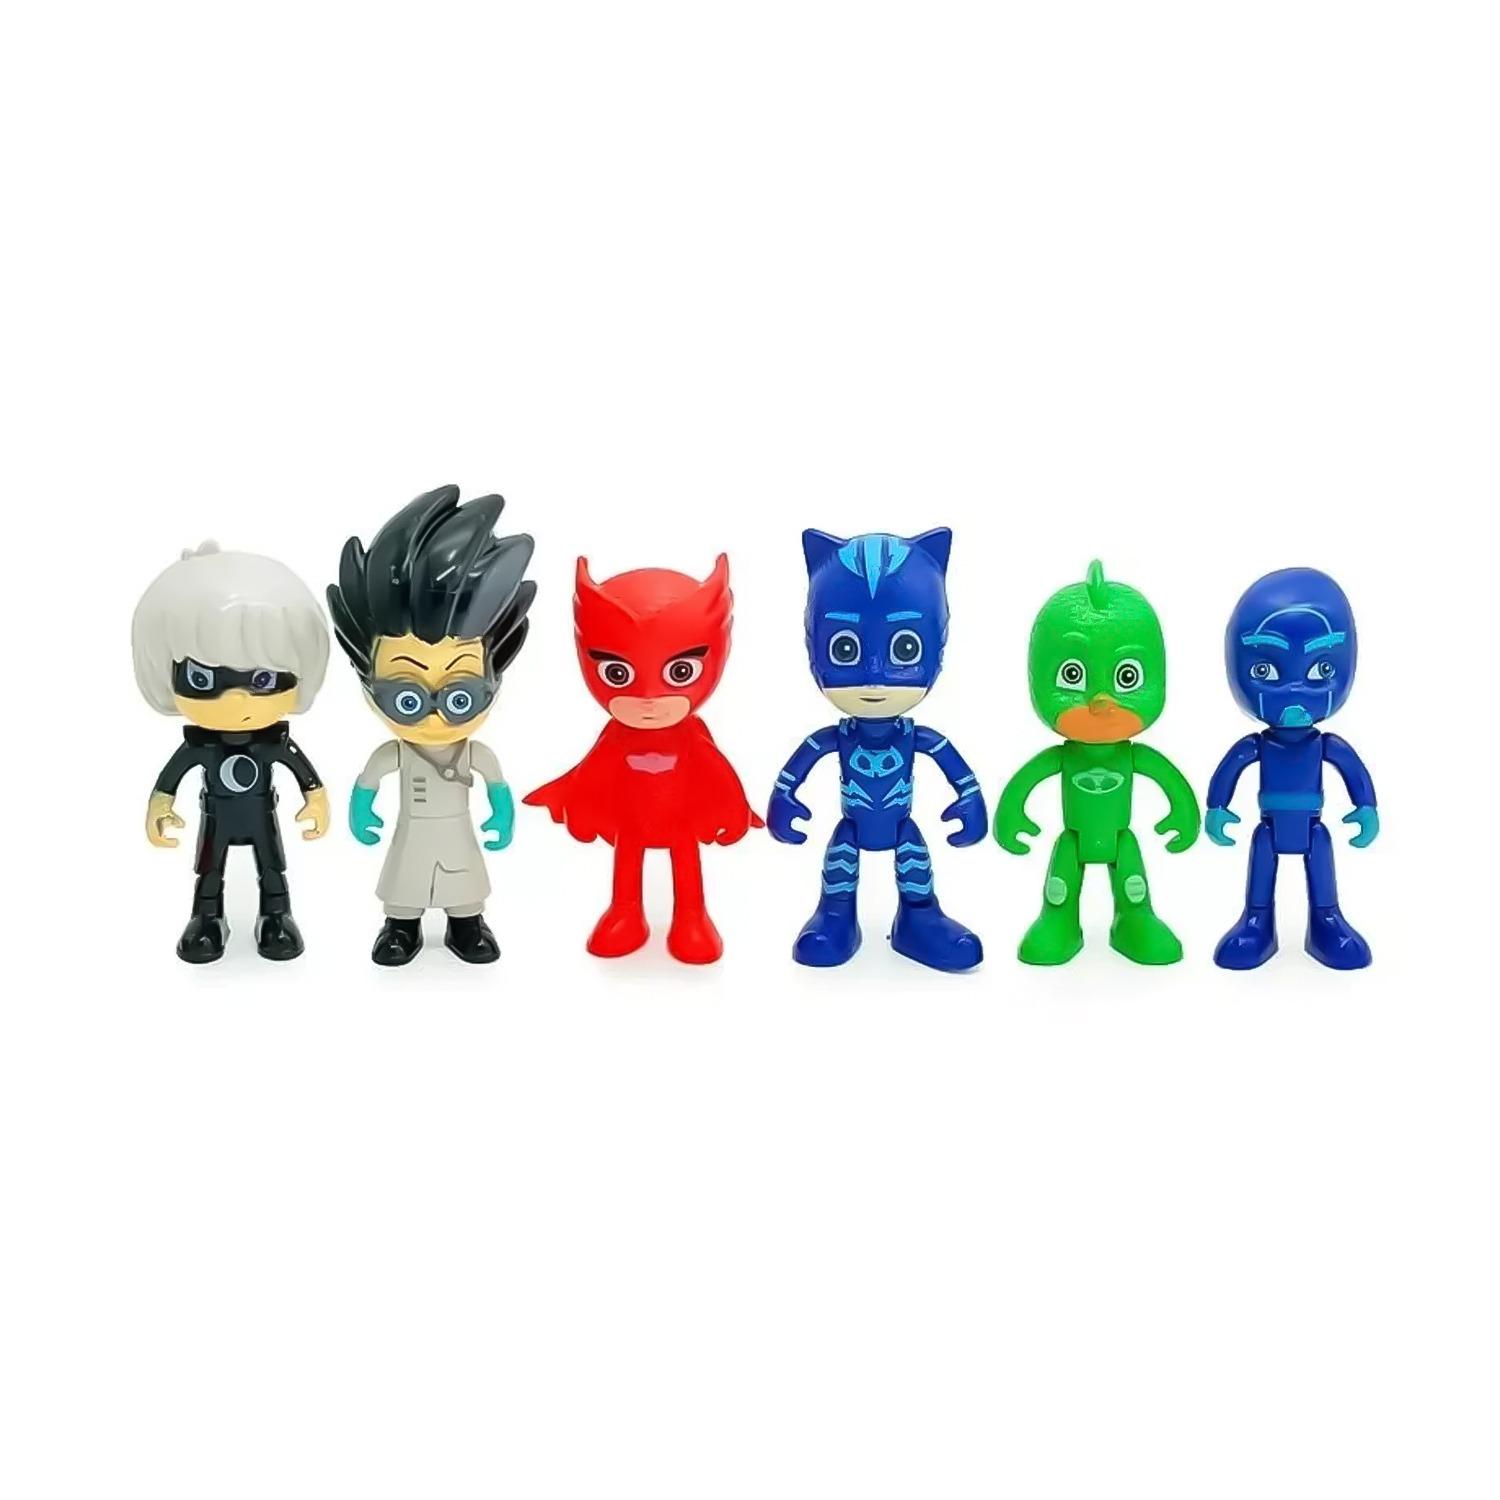 SET OF 6 PJ MASK CAKE TOPPERS